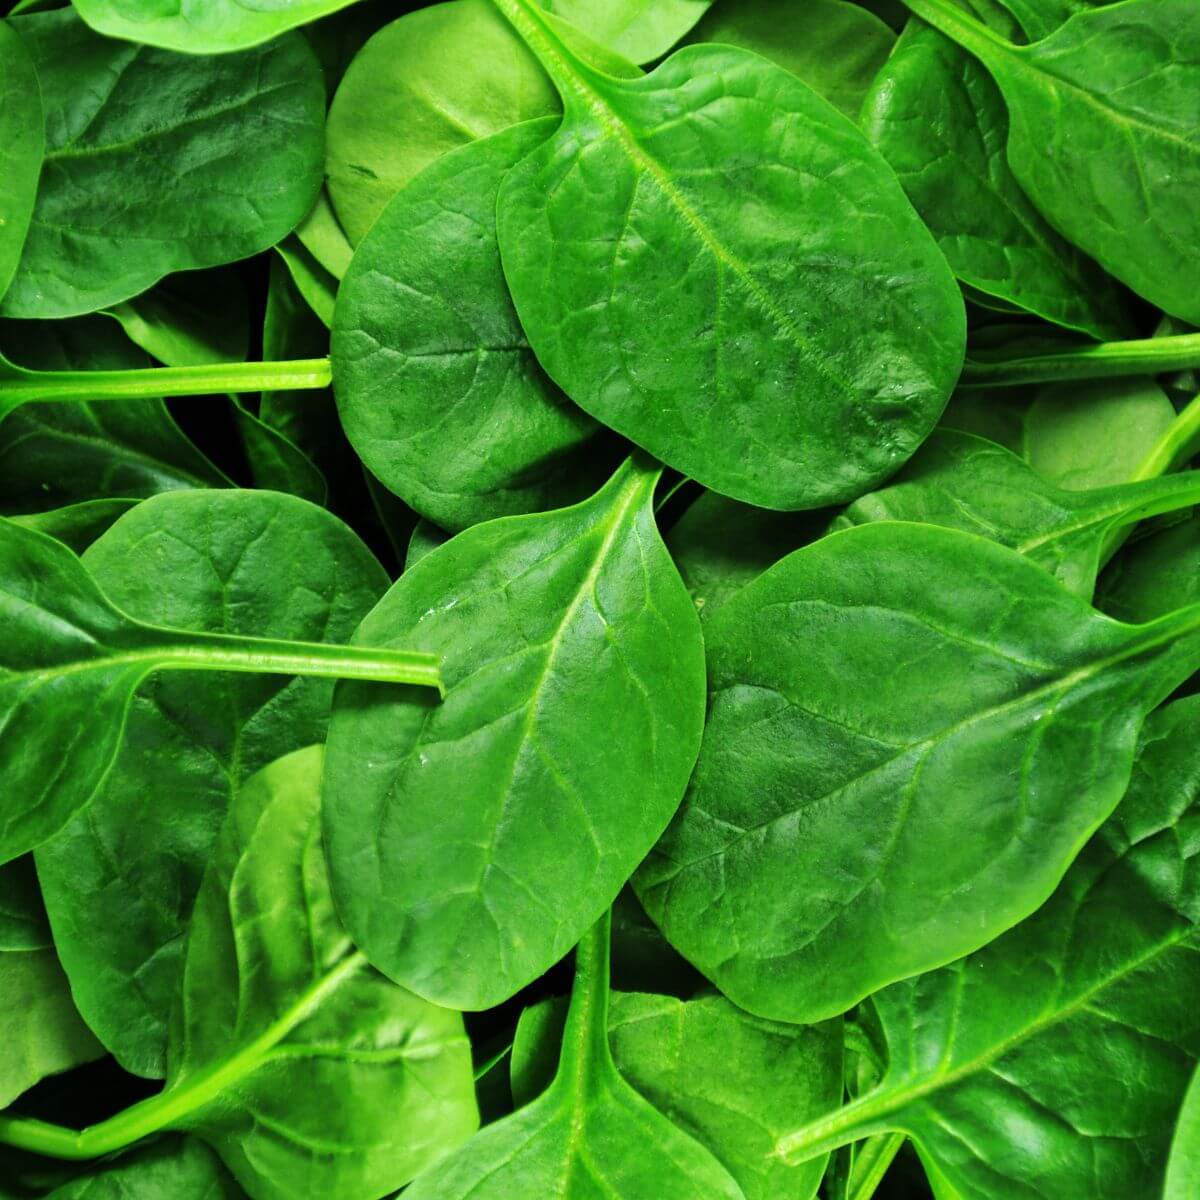 spinach, leafy greens, a food for acne prone skin